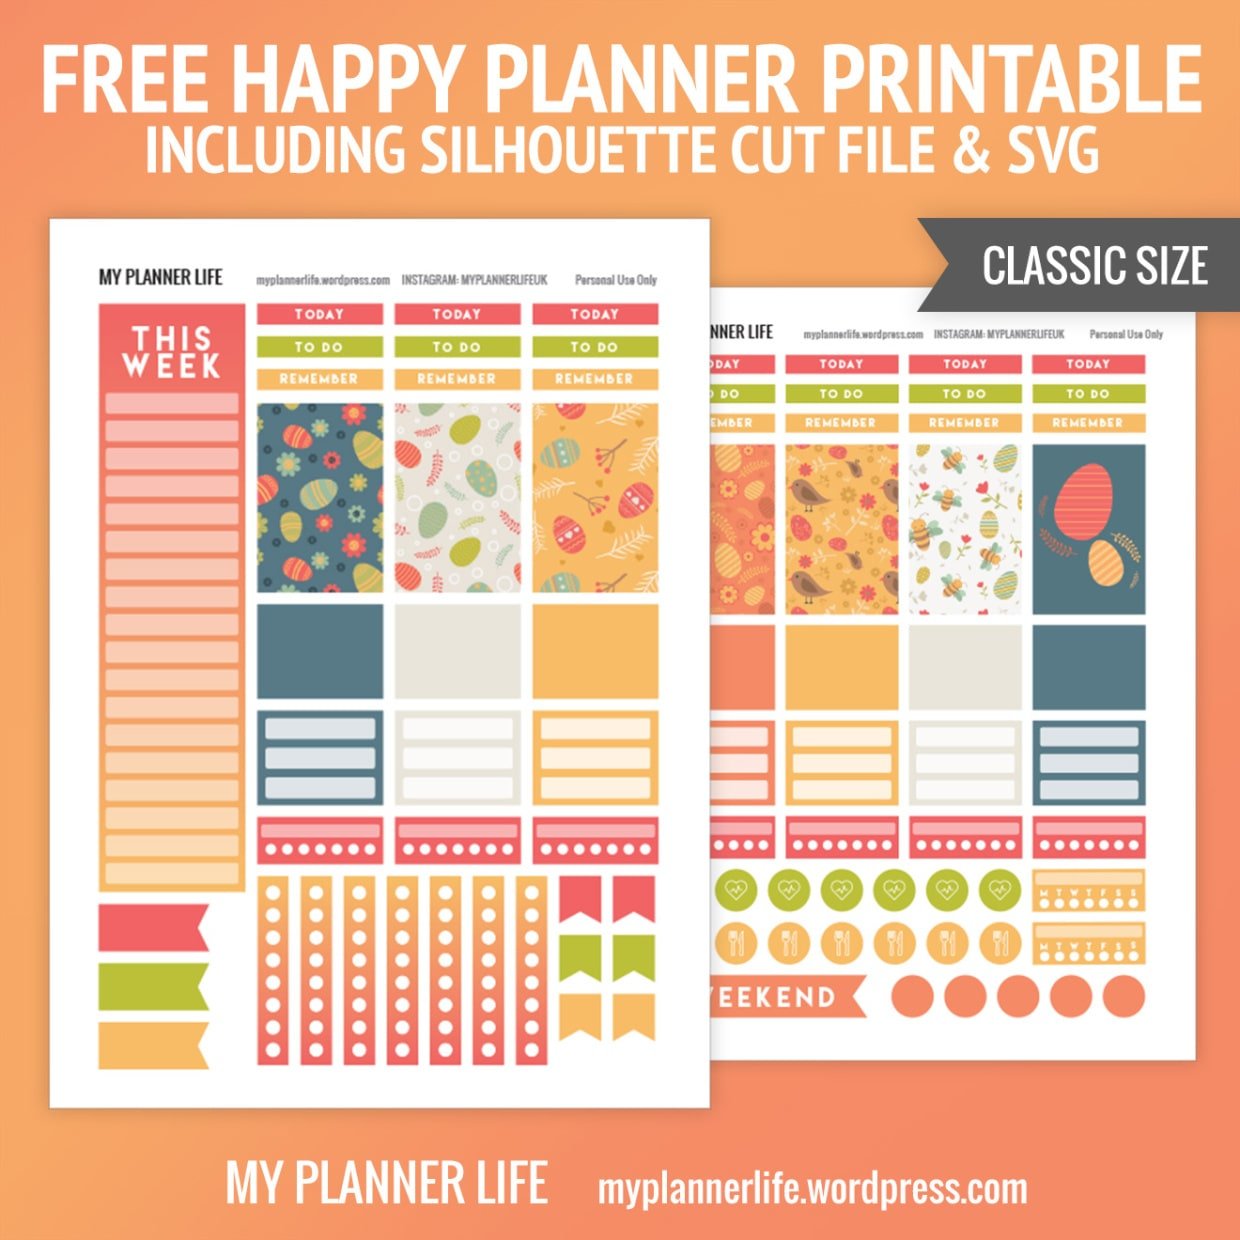 21. Free printable planner stickers for Easter